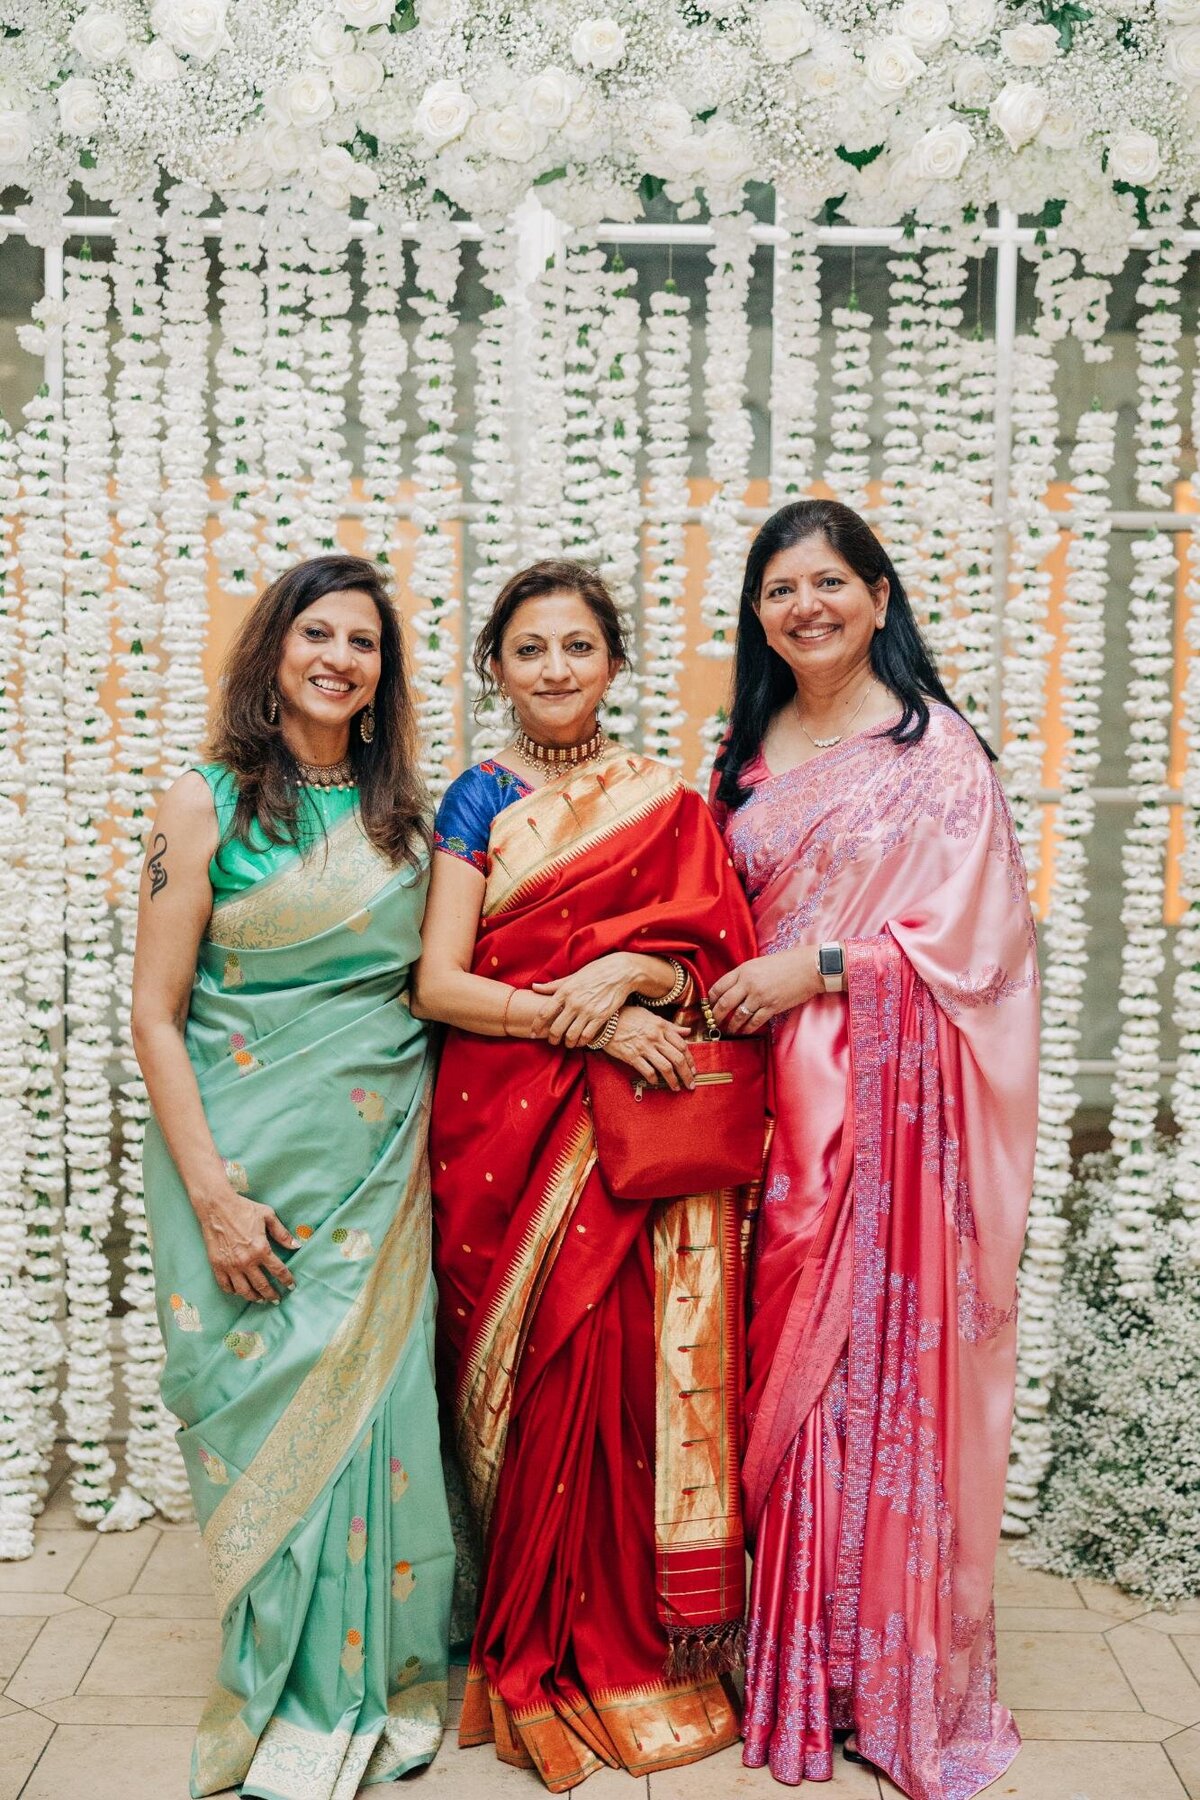 Three women in traditional indian sarees, standing together and smiling at a wedding, with a floral backdrop.